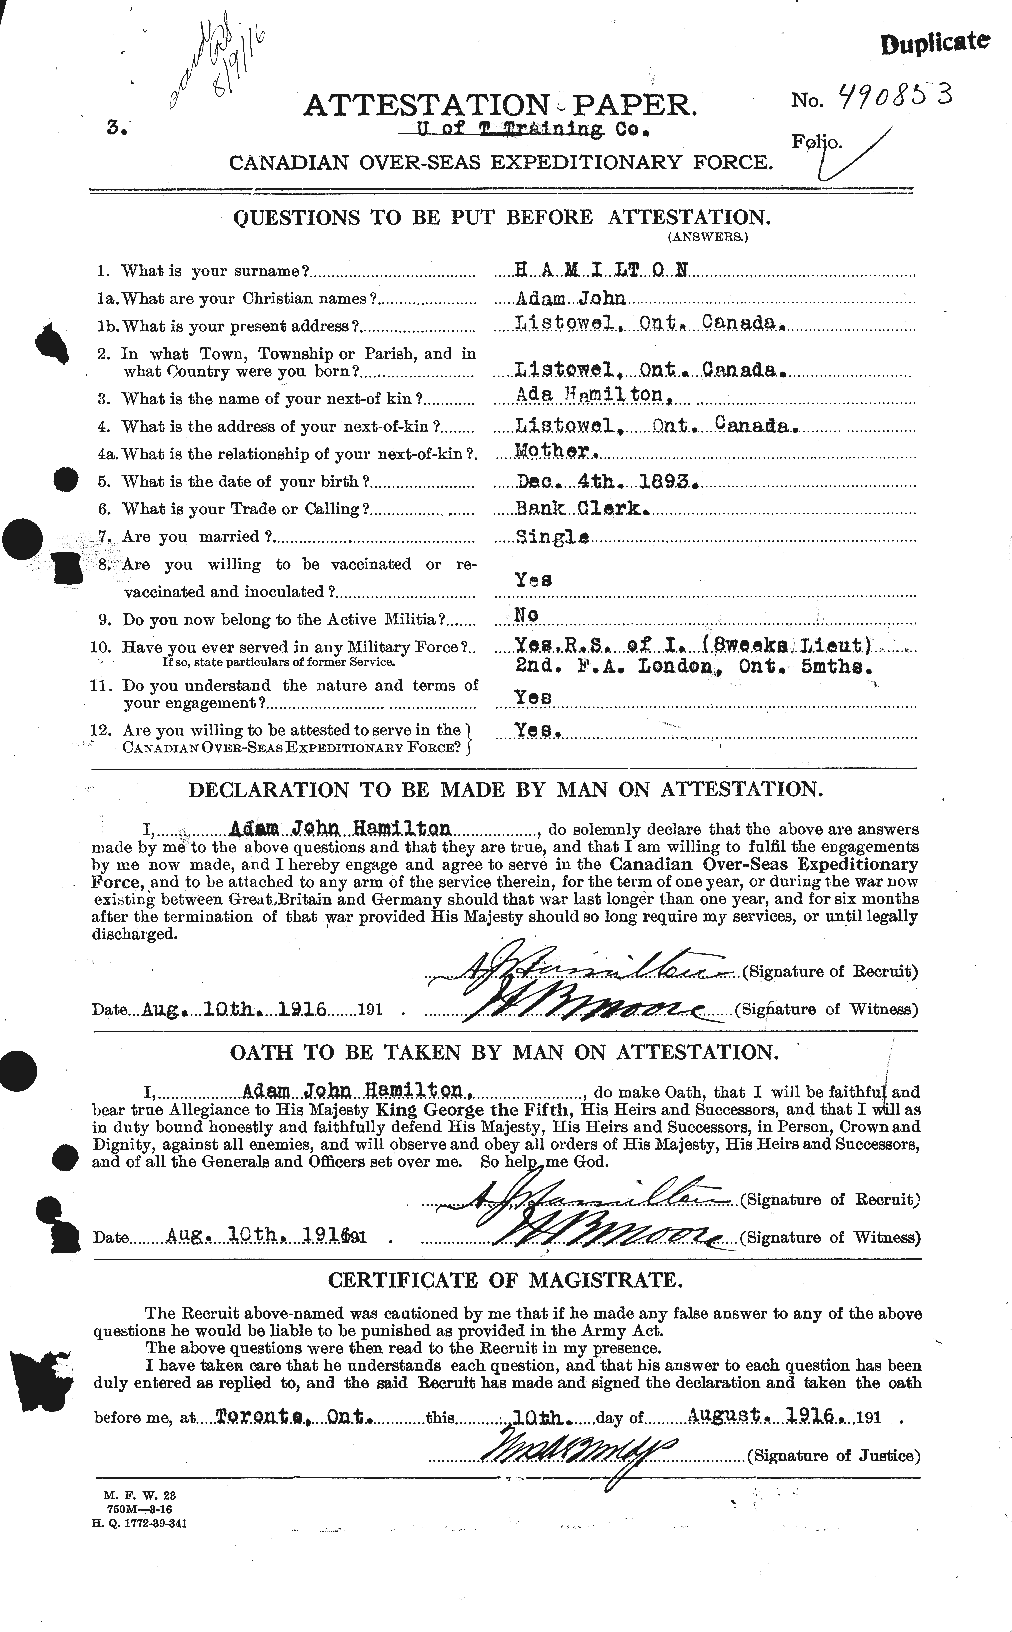 Personnel Records of the First World War - CEF 375180a